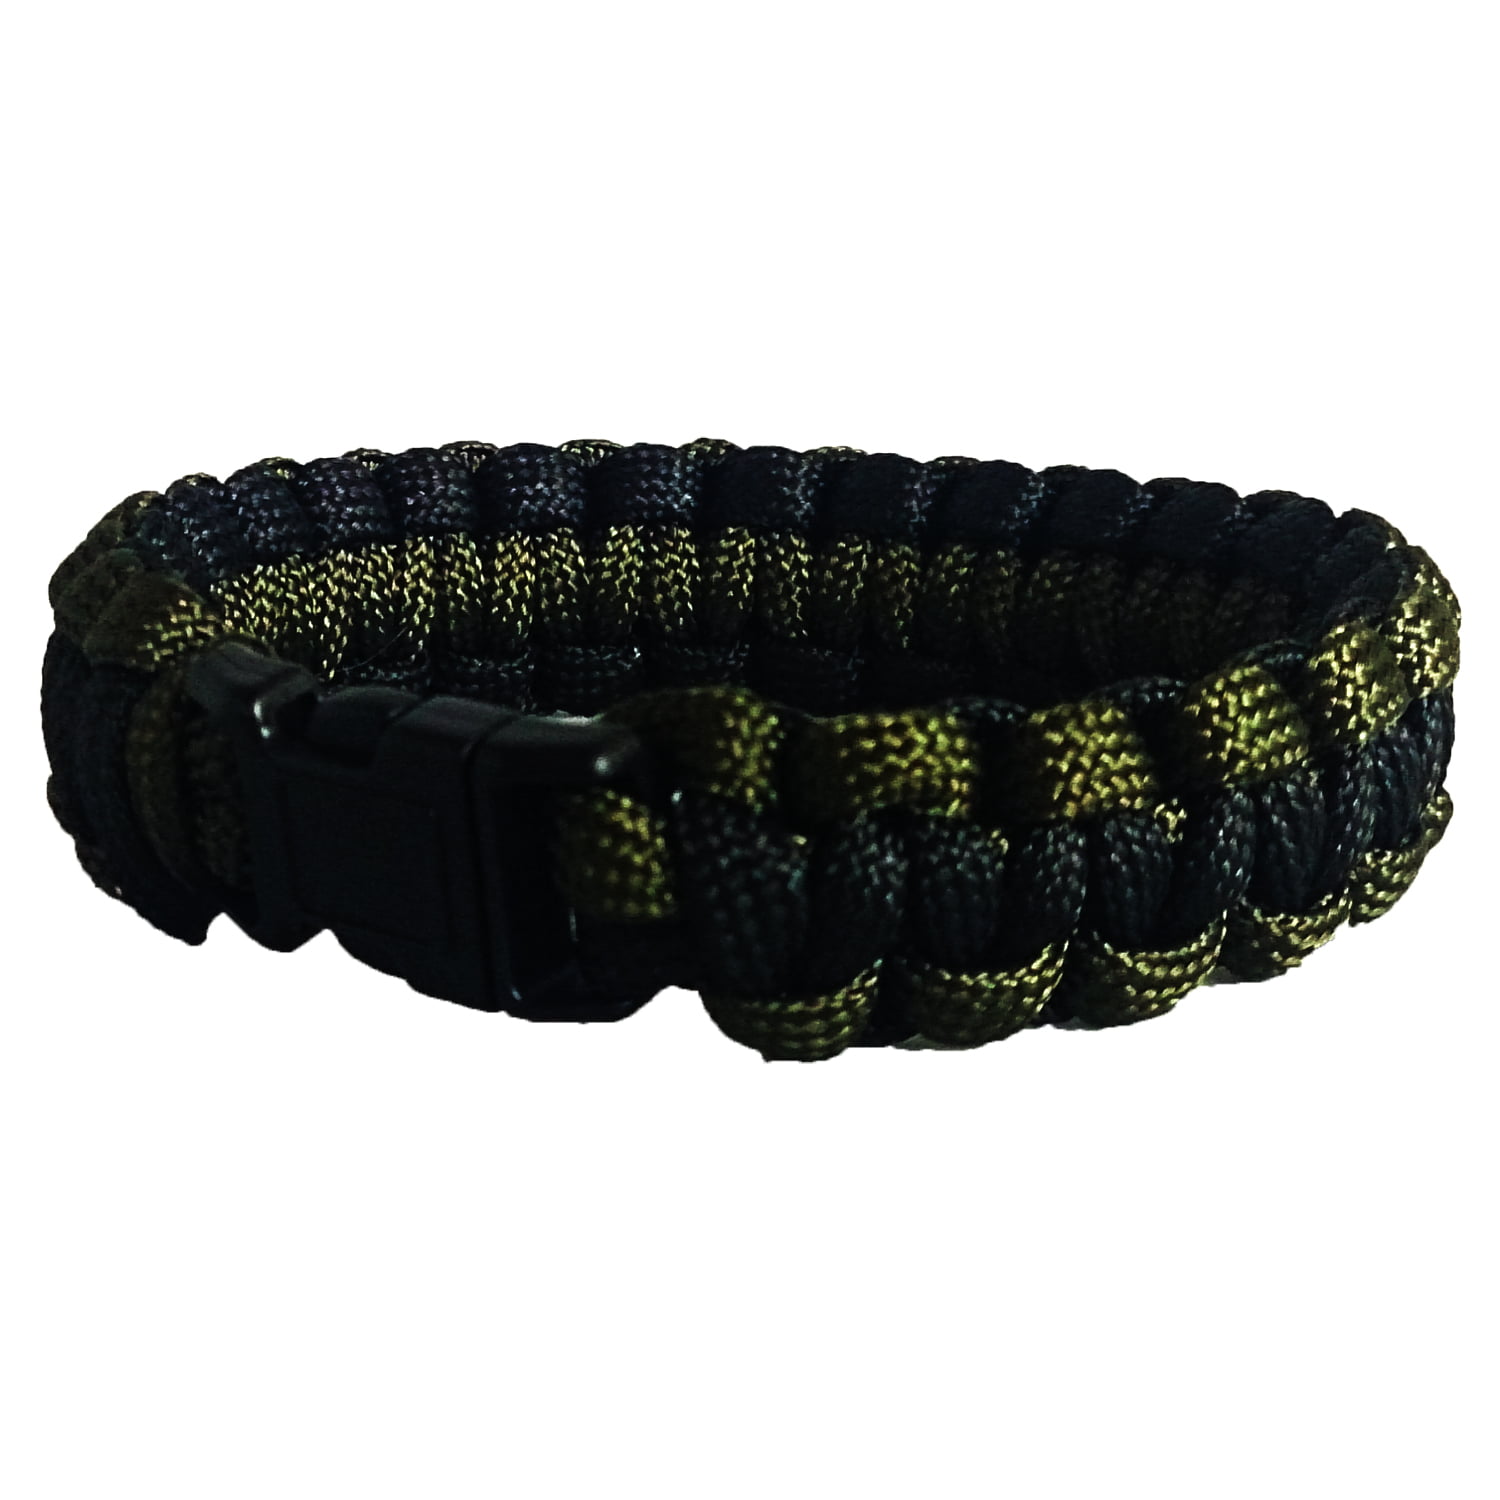 ParaCord Wristband Outdoor Camping Survival Strap Bracelet Yellow Black 